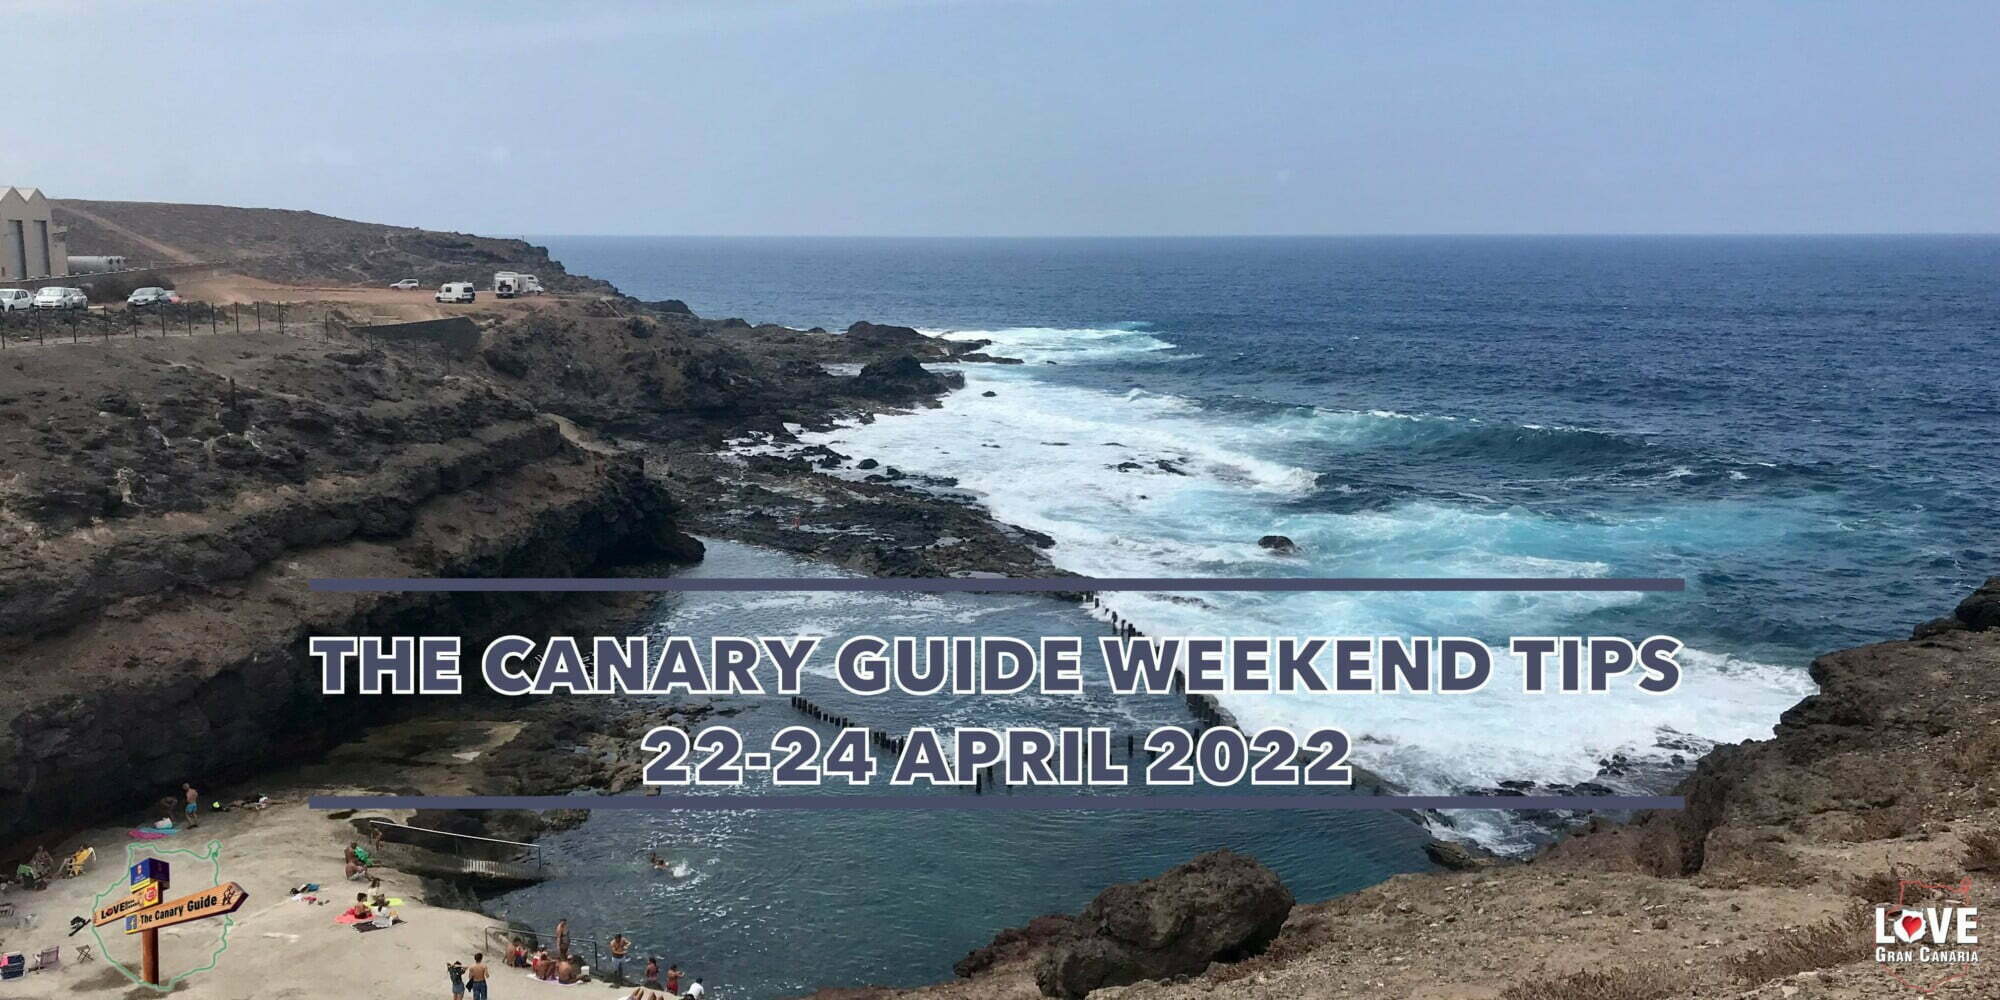 The Canary Guide #WeekendTips 22-24 April 2022